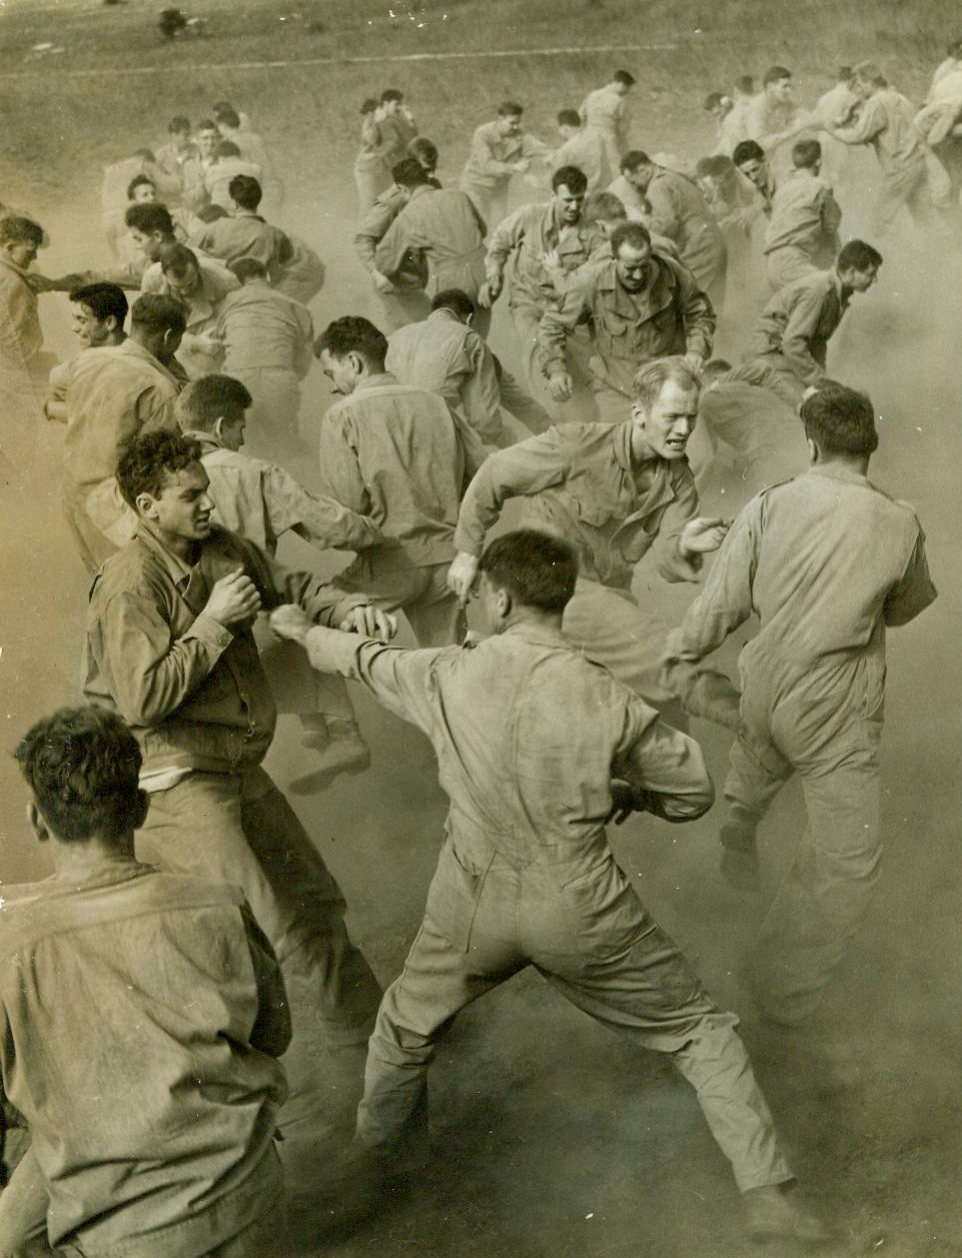 Potential rangers undergo training, 9/25/1942. FORT GEORGE G. MEADE, MD. – Kicking up the dust trainees under the instruction of Major Franco O’Eliscu are undergoing rigorous workouts in preparation for ranger attacks against our enemy. Here the group engages in hand to hand combat. CREDIT LINE (ACME) 9/25/42;